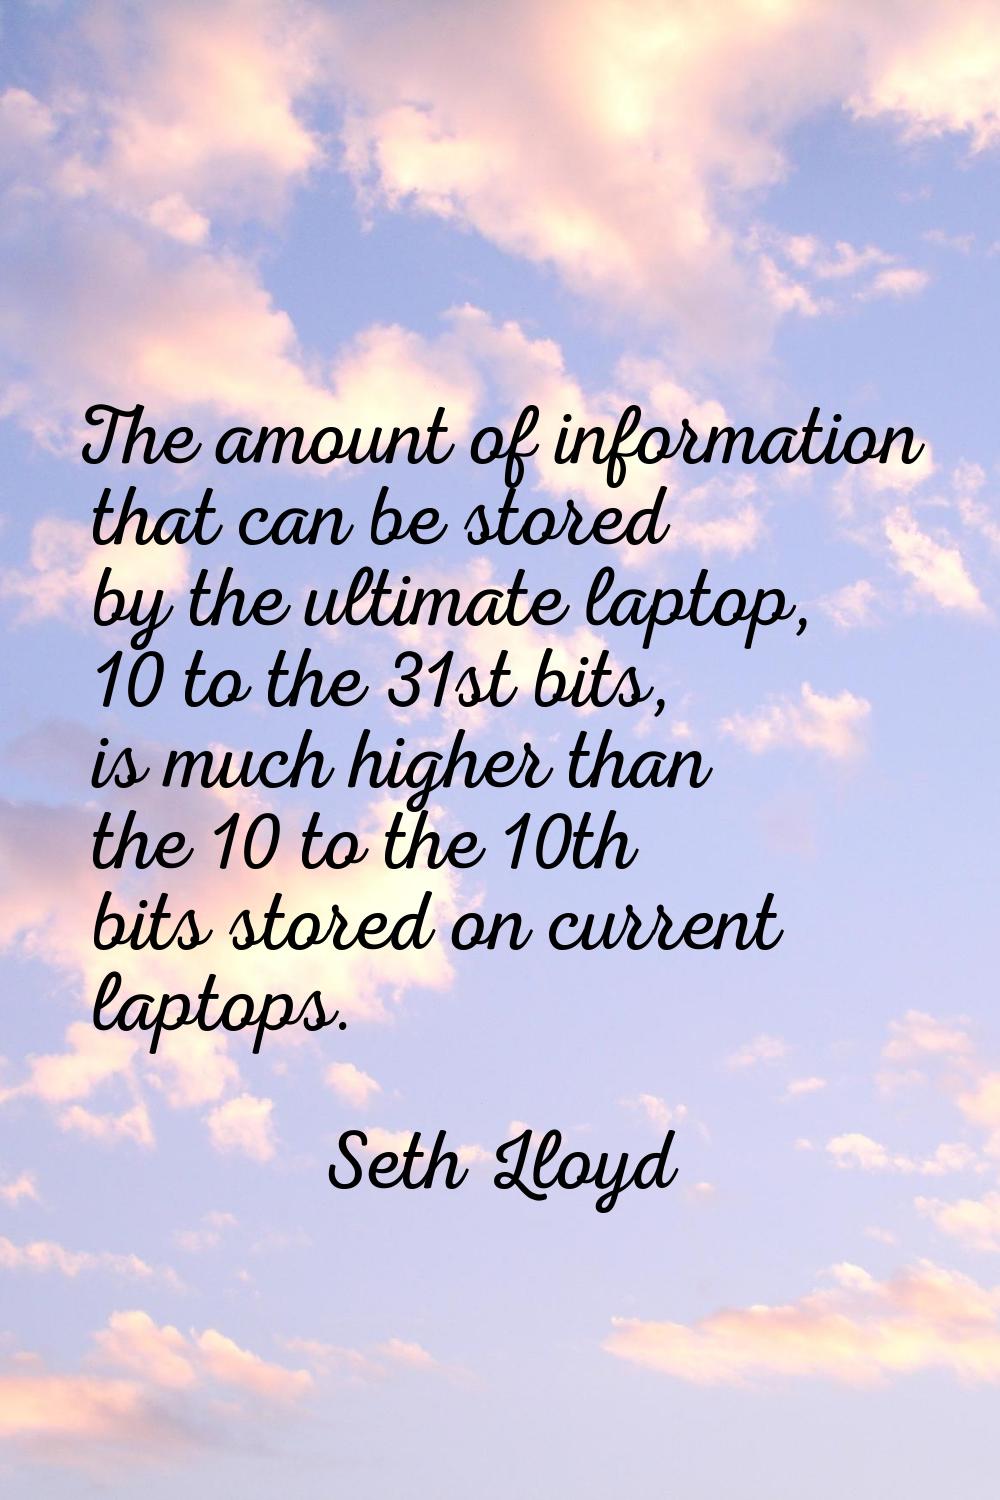 The amount of information that can be stored by the ultimate laptop, 10 to the 31st bits, is much h